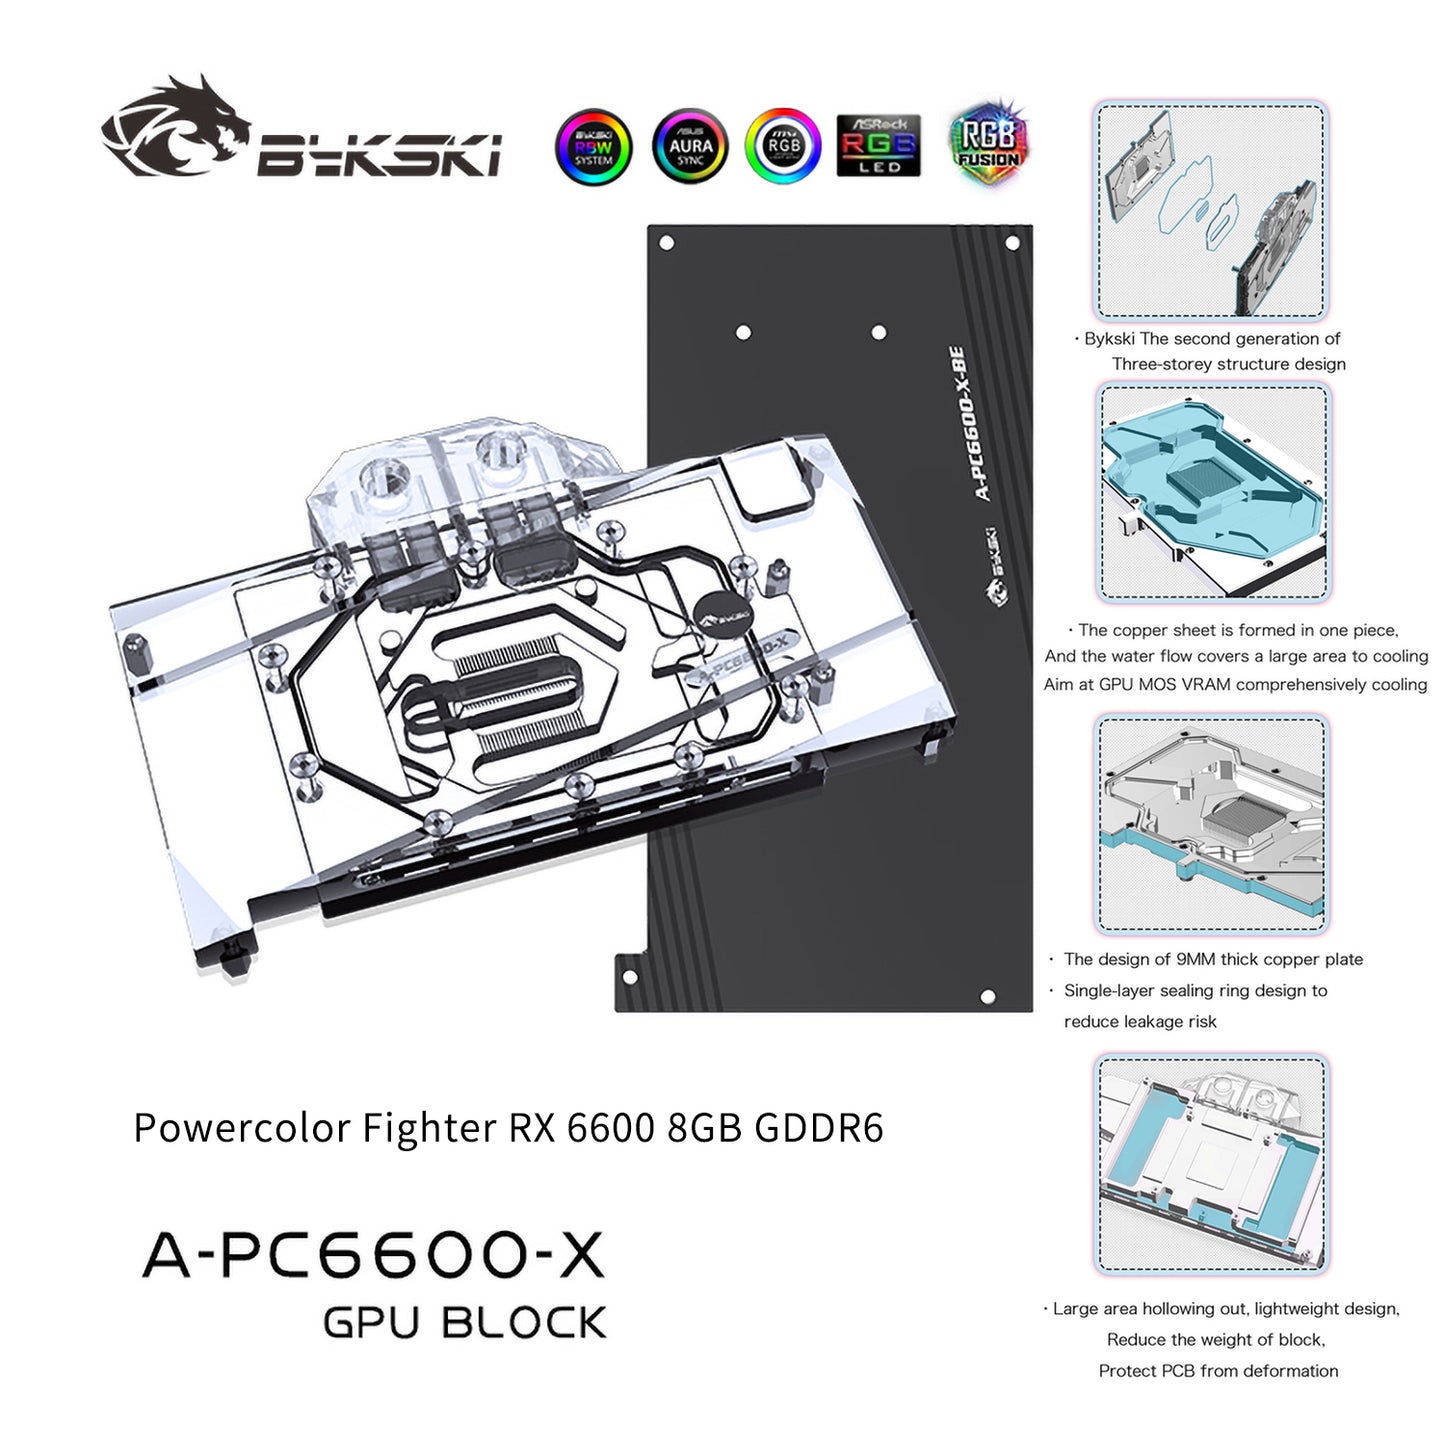 Bykski GPU Water Block For Powercolor Fighter RX 6600 8GB GDDR6, Full Cover With Backplate PC Water Cooling Cooler, A-PC6600-X